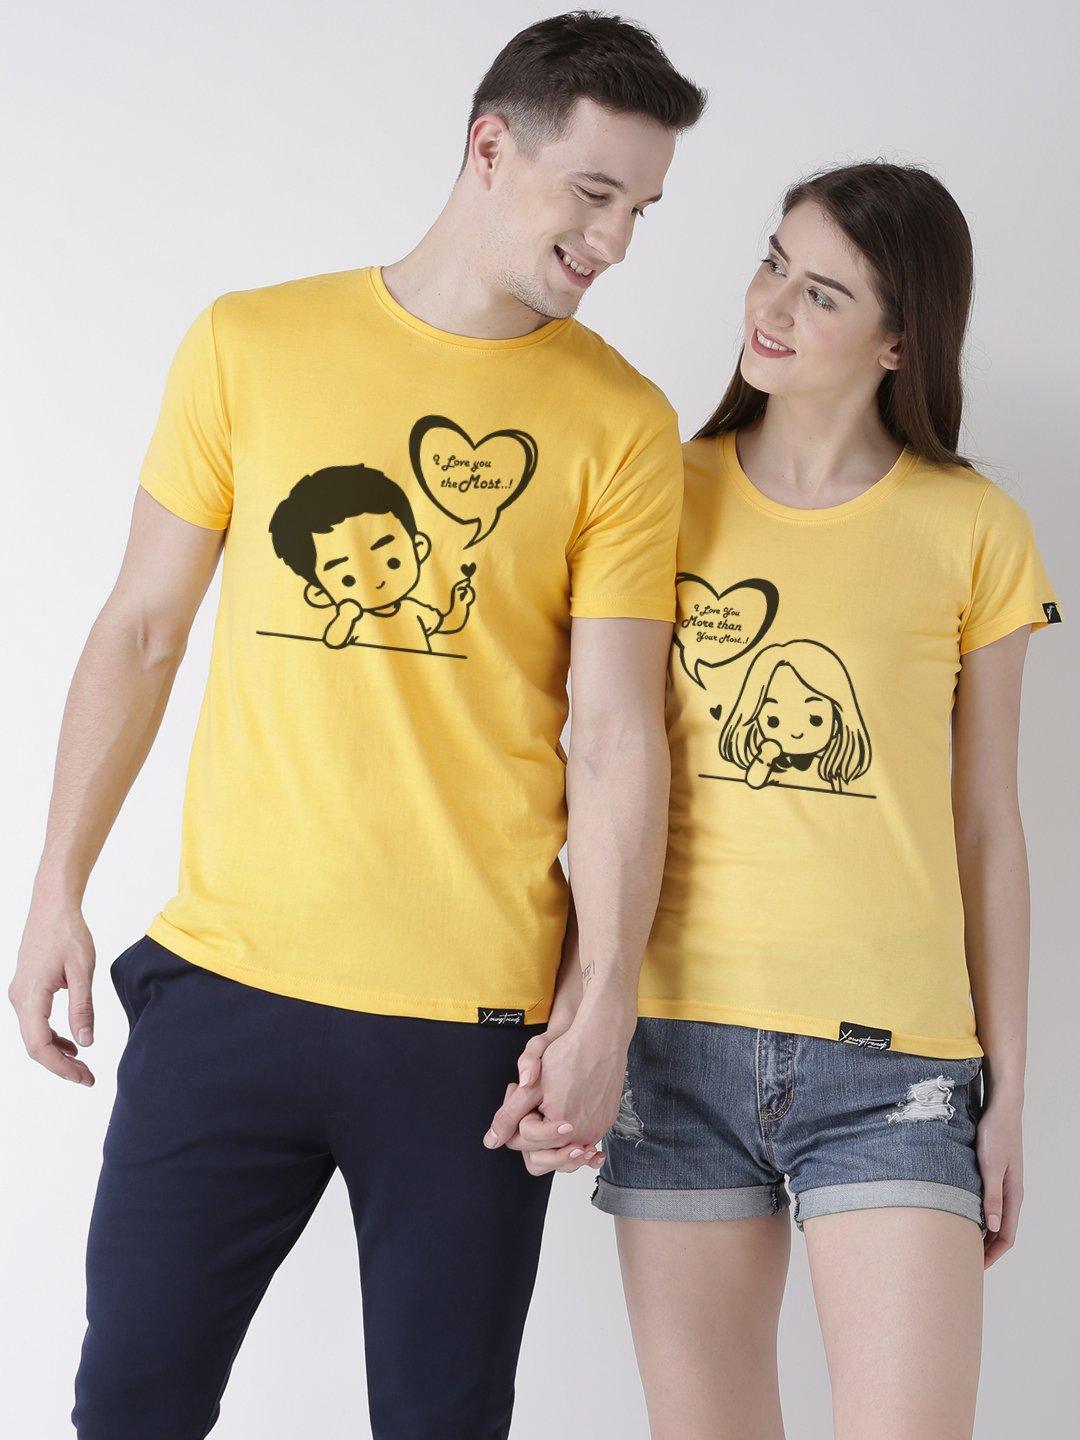 Duo Couple Bio Wash Cotton Love You Printed Yellow Color Half Sleeve Couple T Shirts Young Trendz